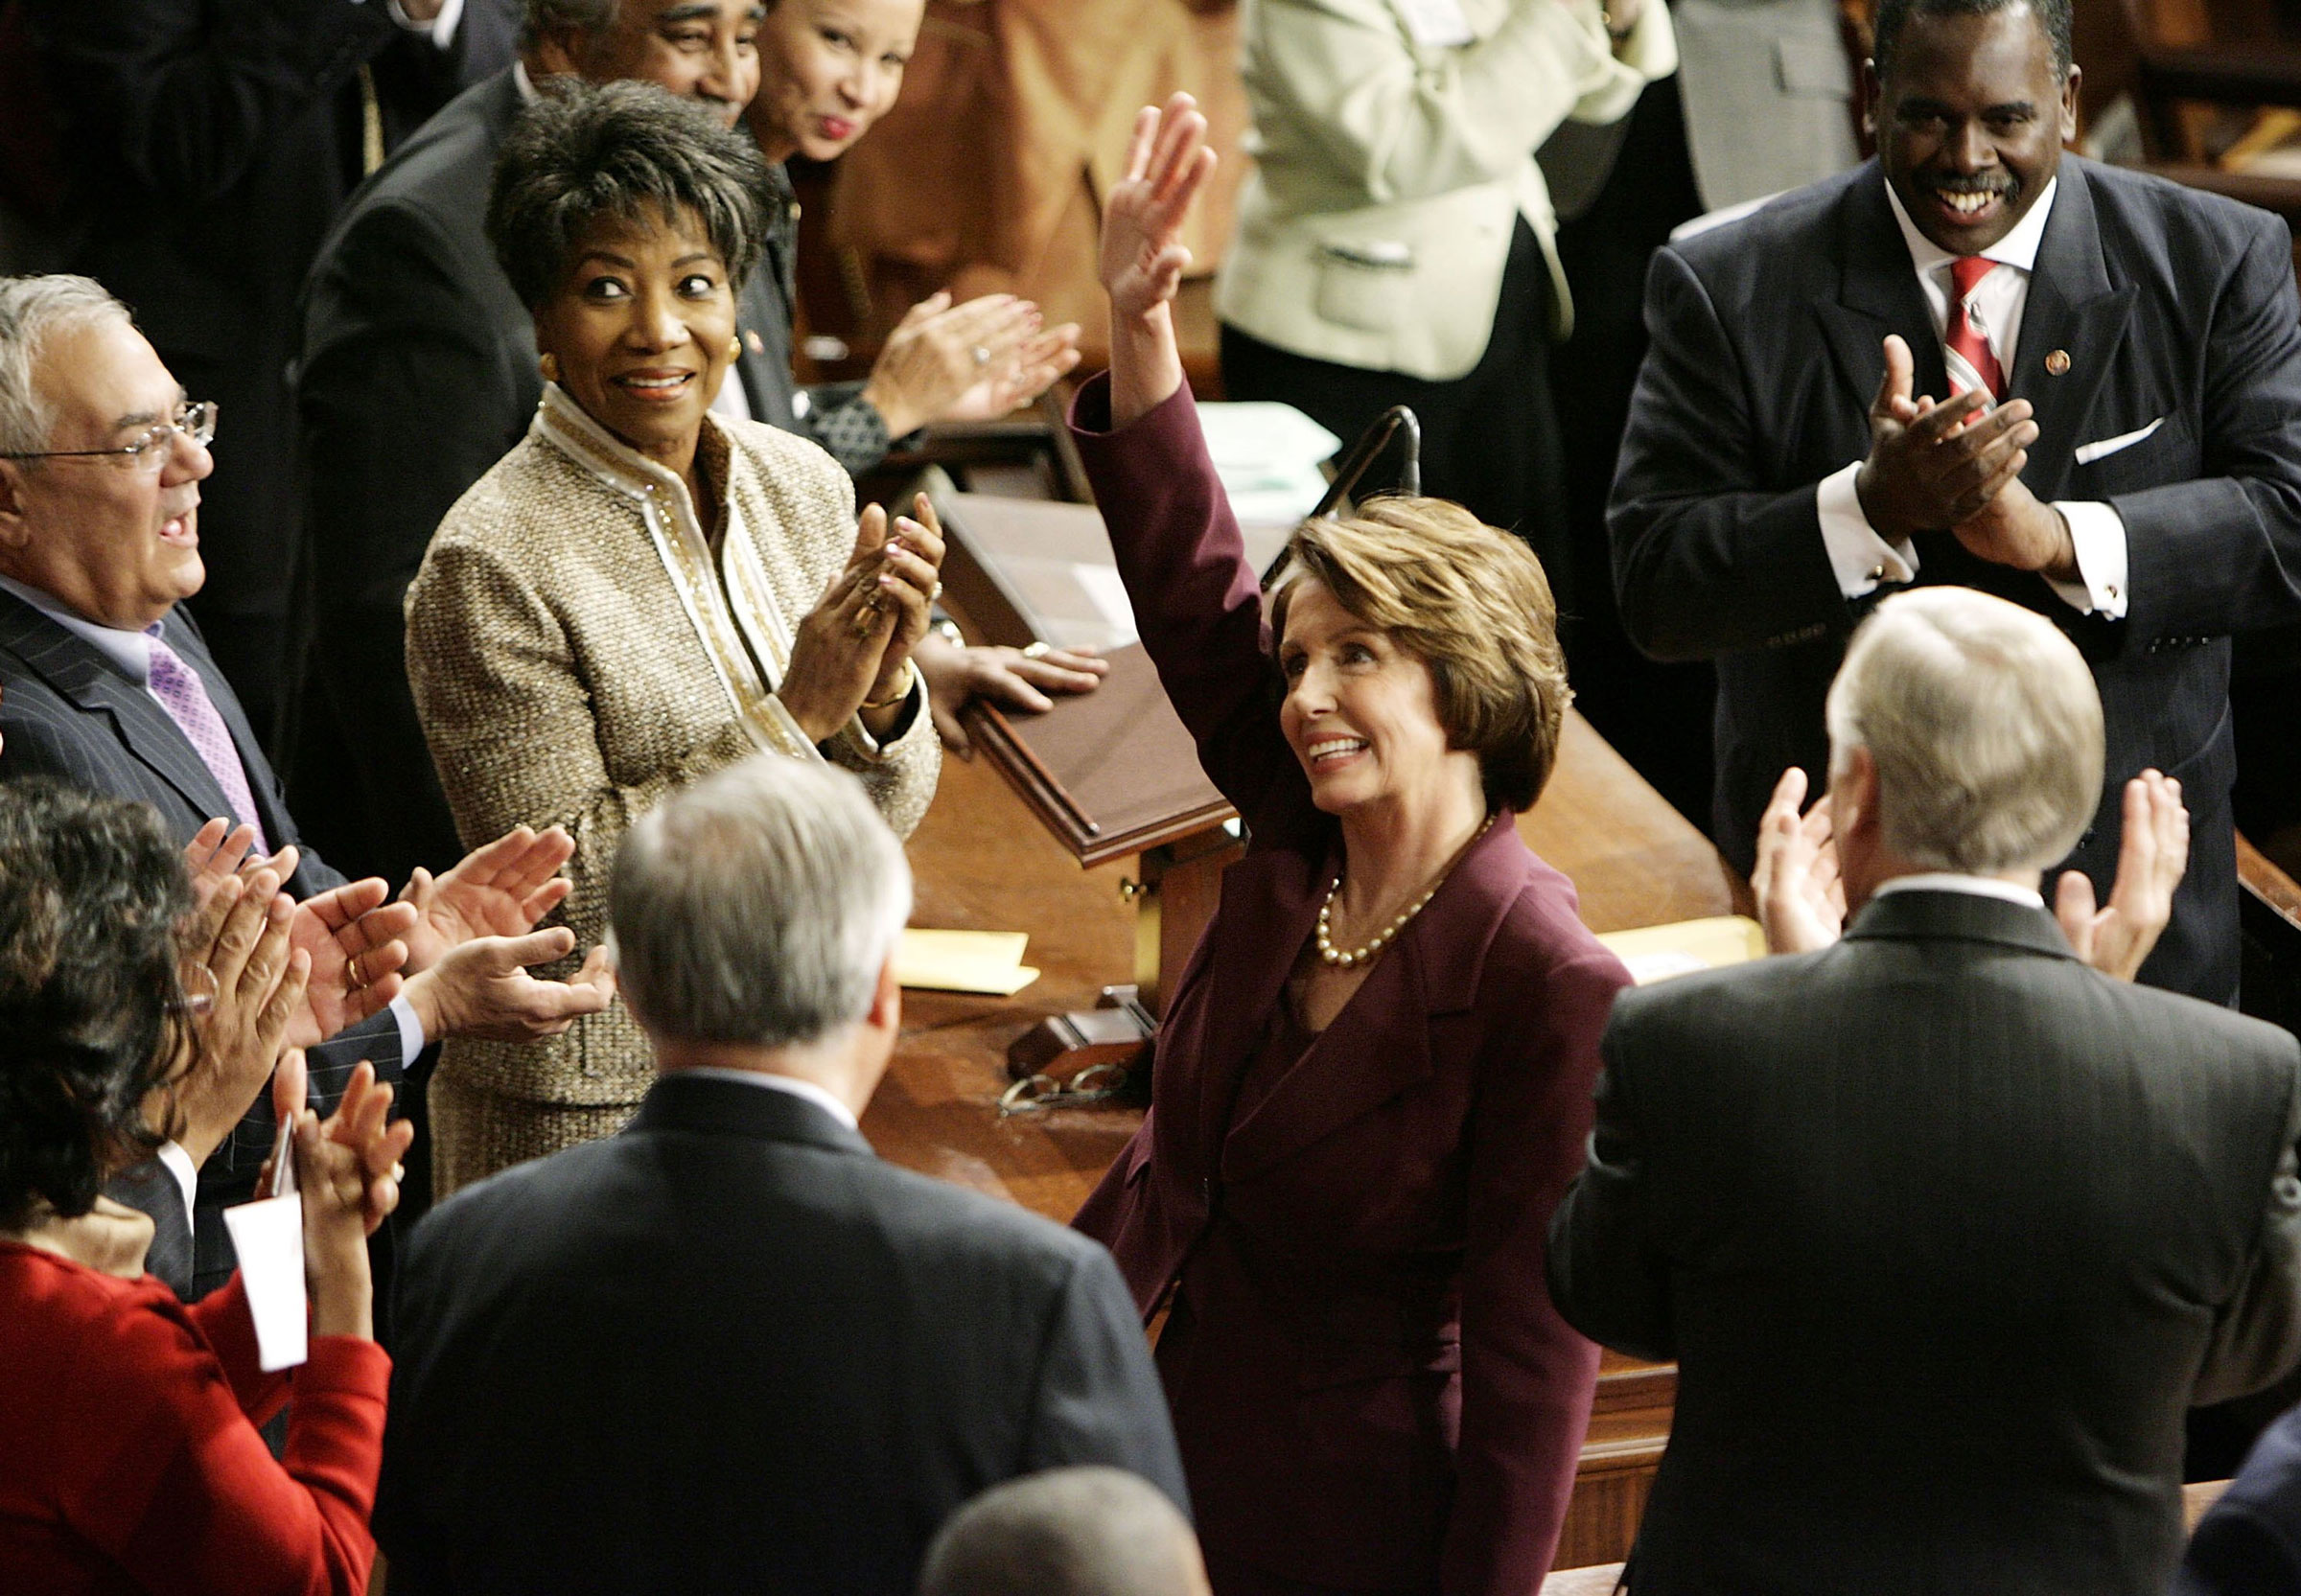 Speaker of the House Nancy Pelosi waves to colleagues while being nominated as the next Speaker of the House during a swearing in ceremony for the 110th Congress in the House Chamber of the U.S. Capitol in Washington, DC., on Jan. 4, 2007.